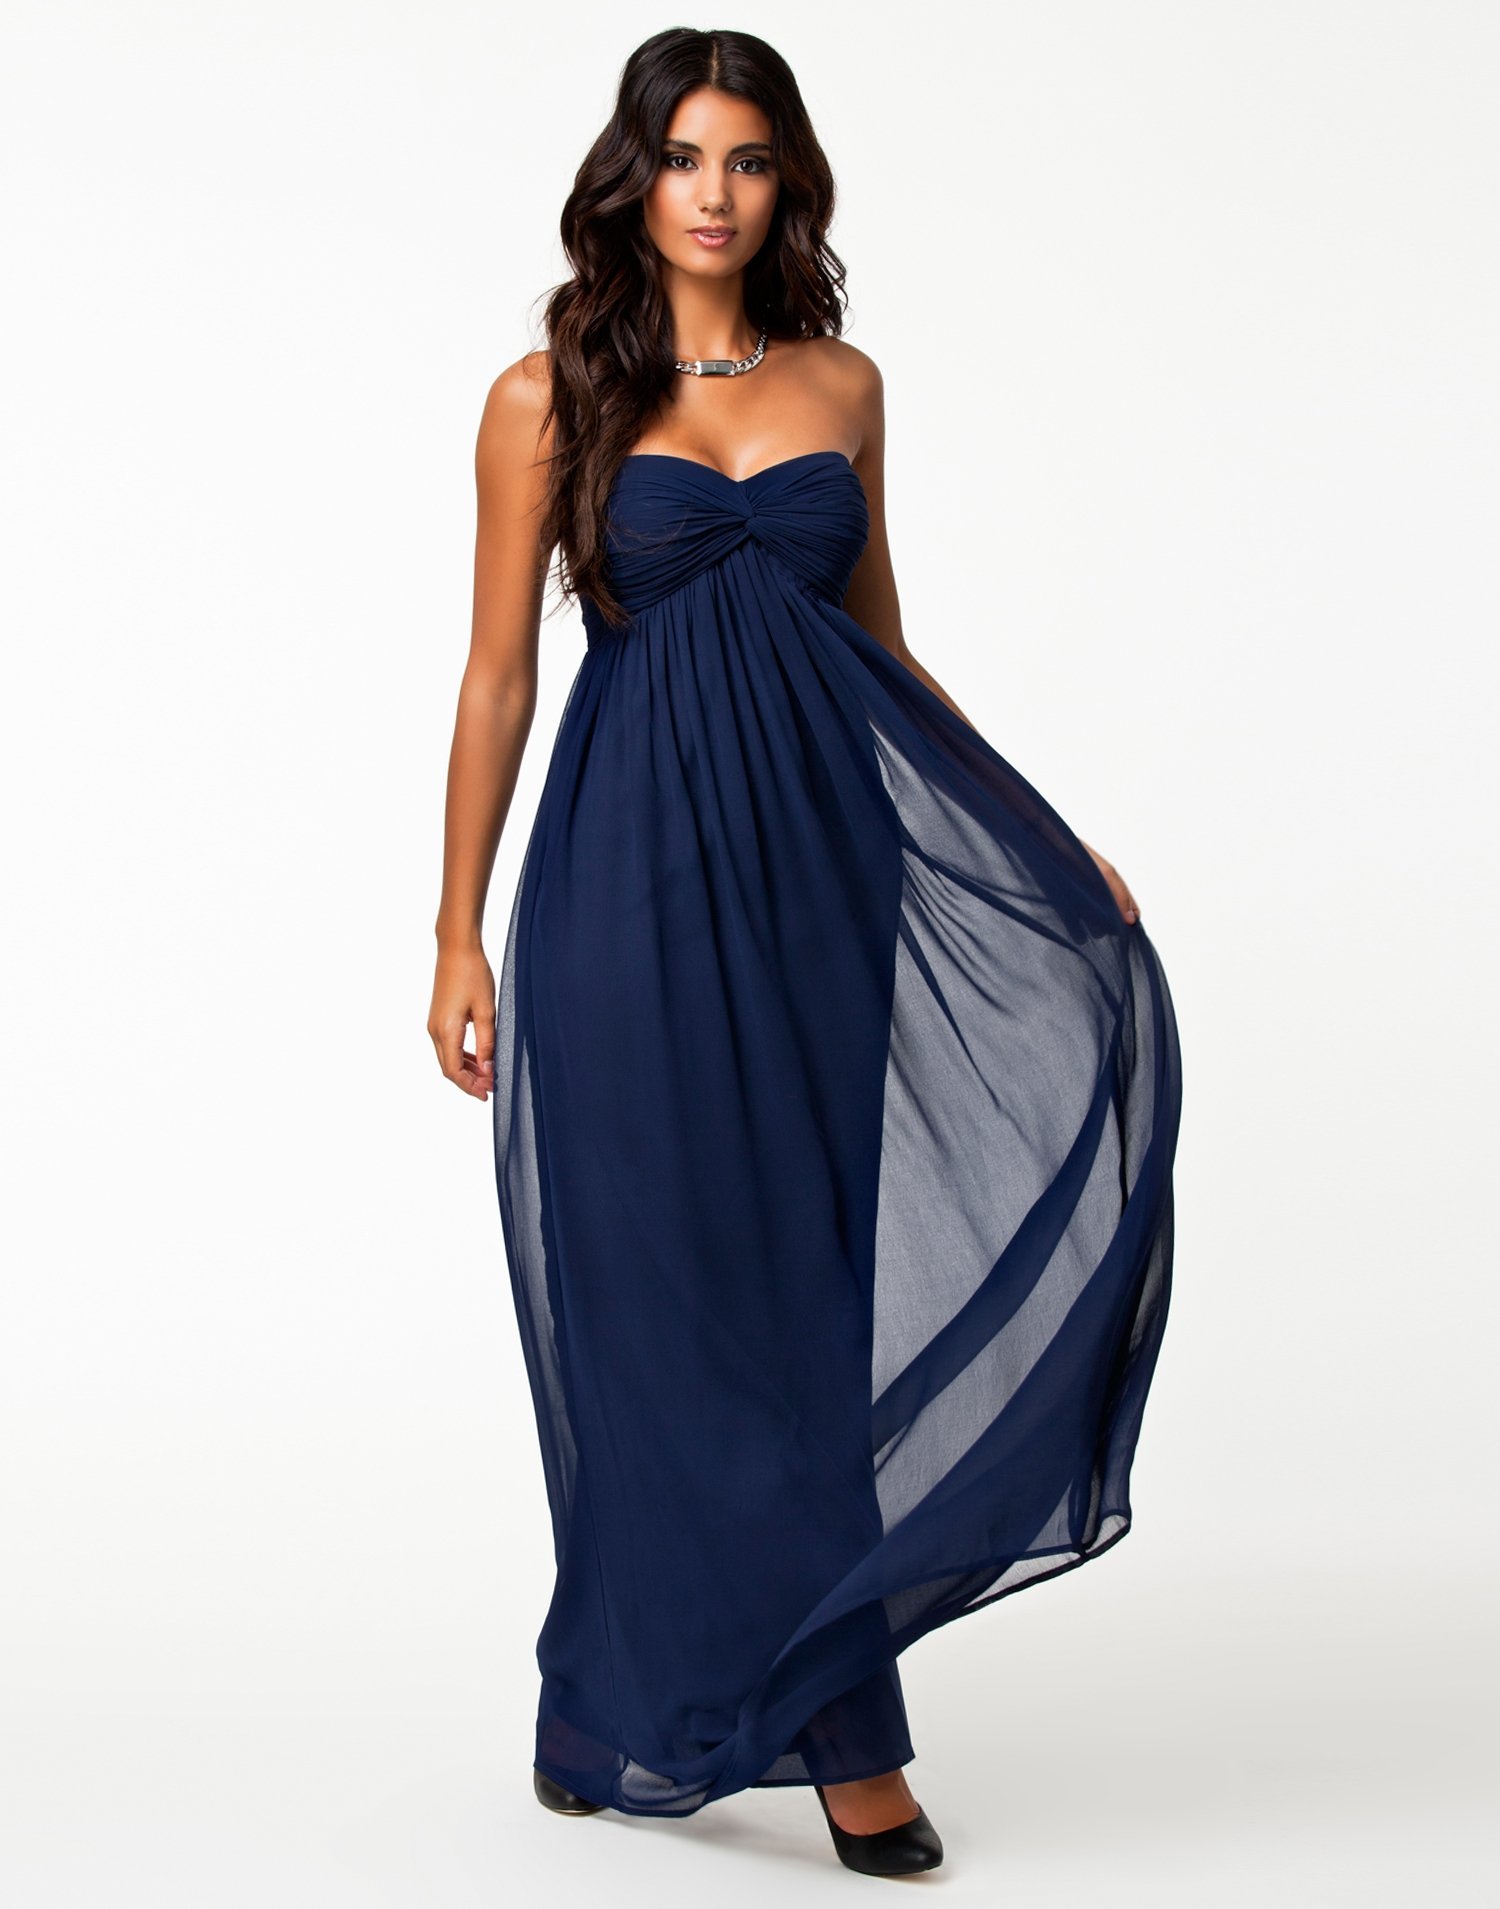 Dreamy Dress - Nly Trend - Navy - Party Dresses - Clothing - Women ...